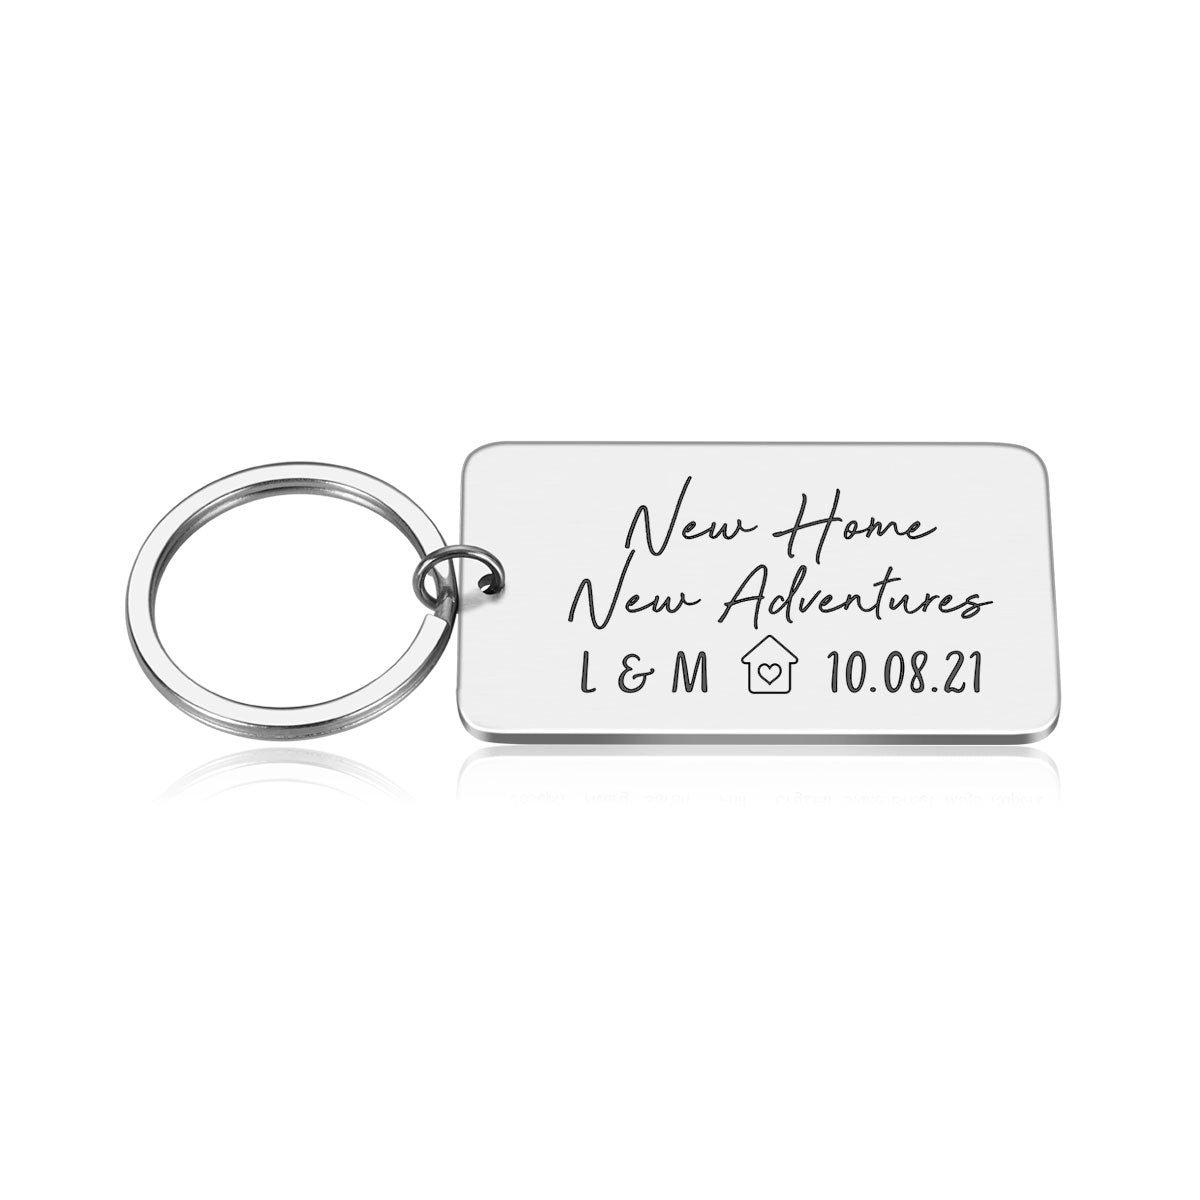 New Home New Adventures Key ring Custom Initials and Date